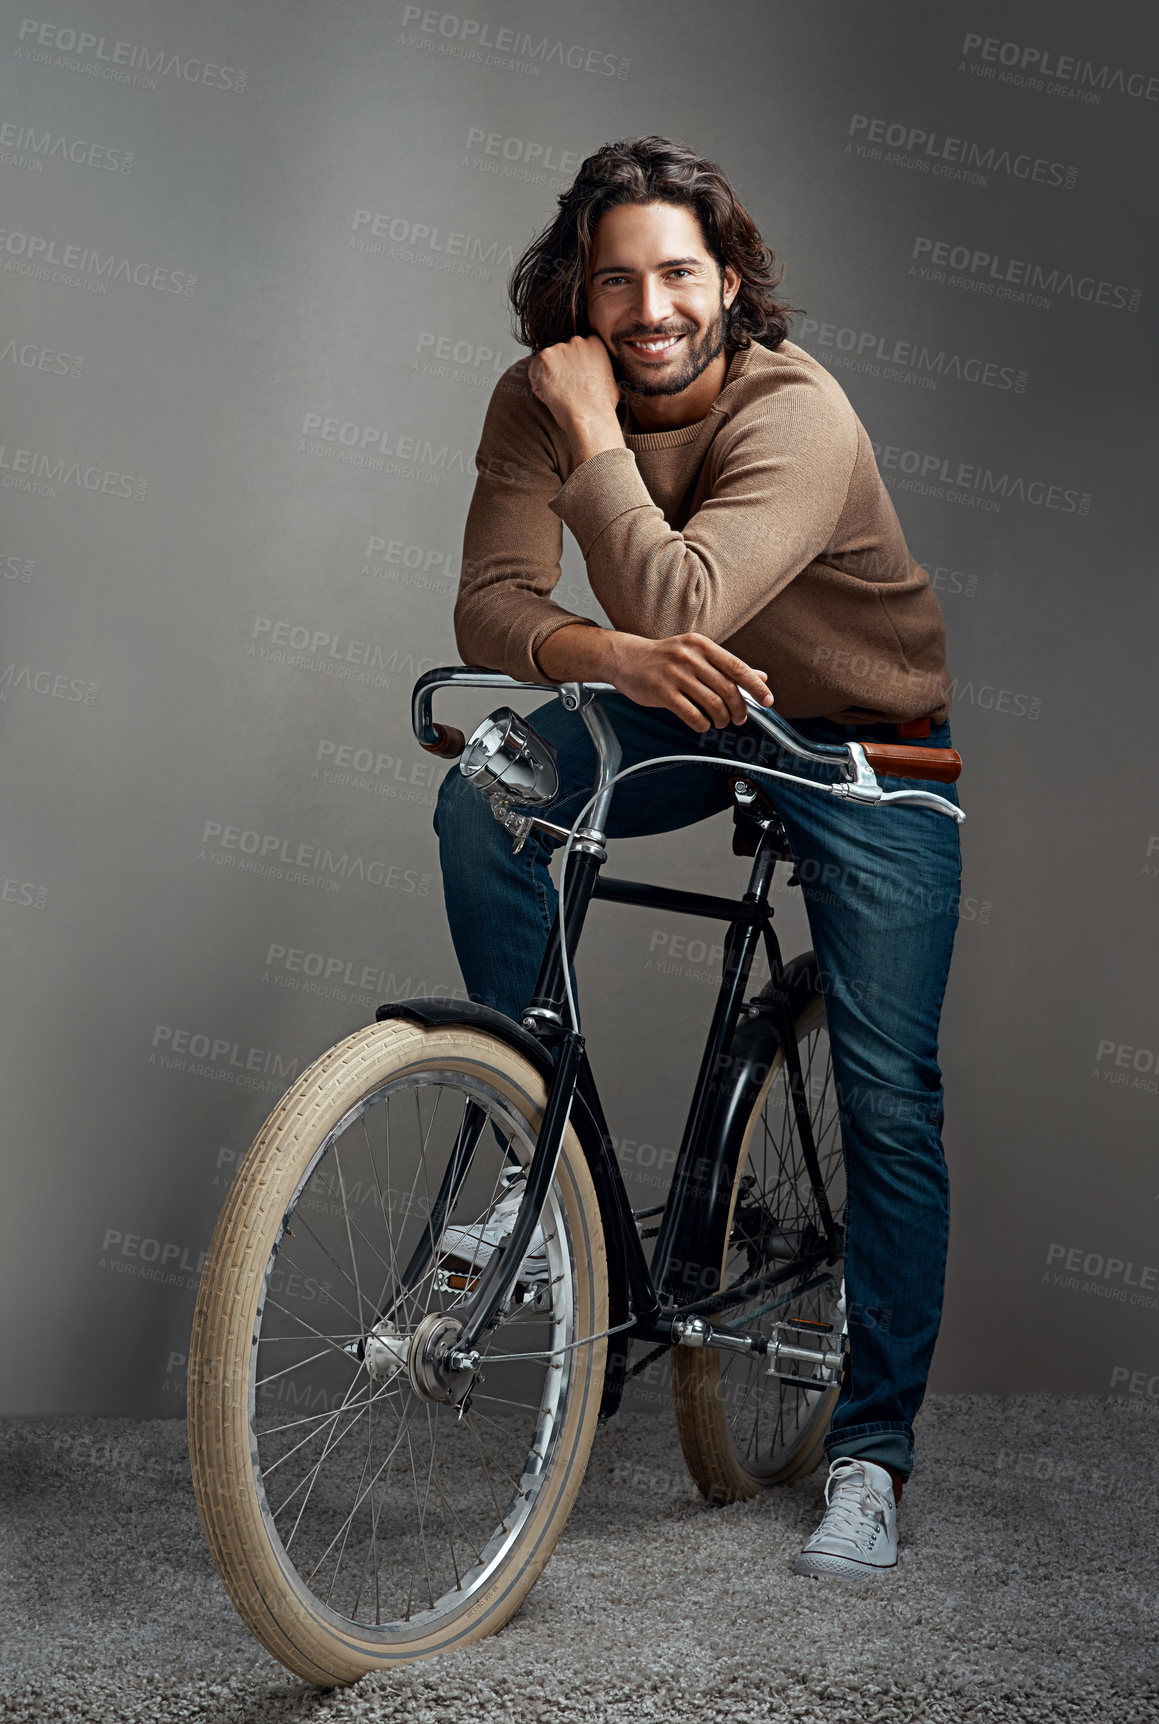 Buy stock photo Studio shot of a handsome young man leaning against a bicycle in front of a gray background